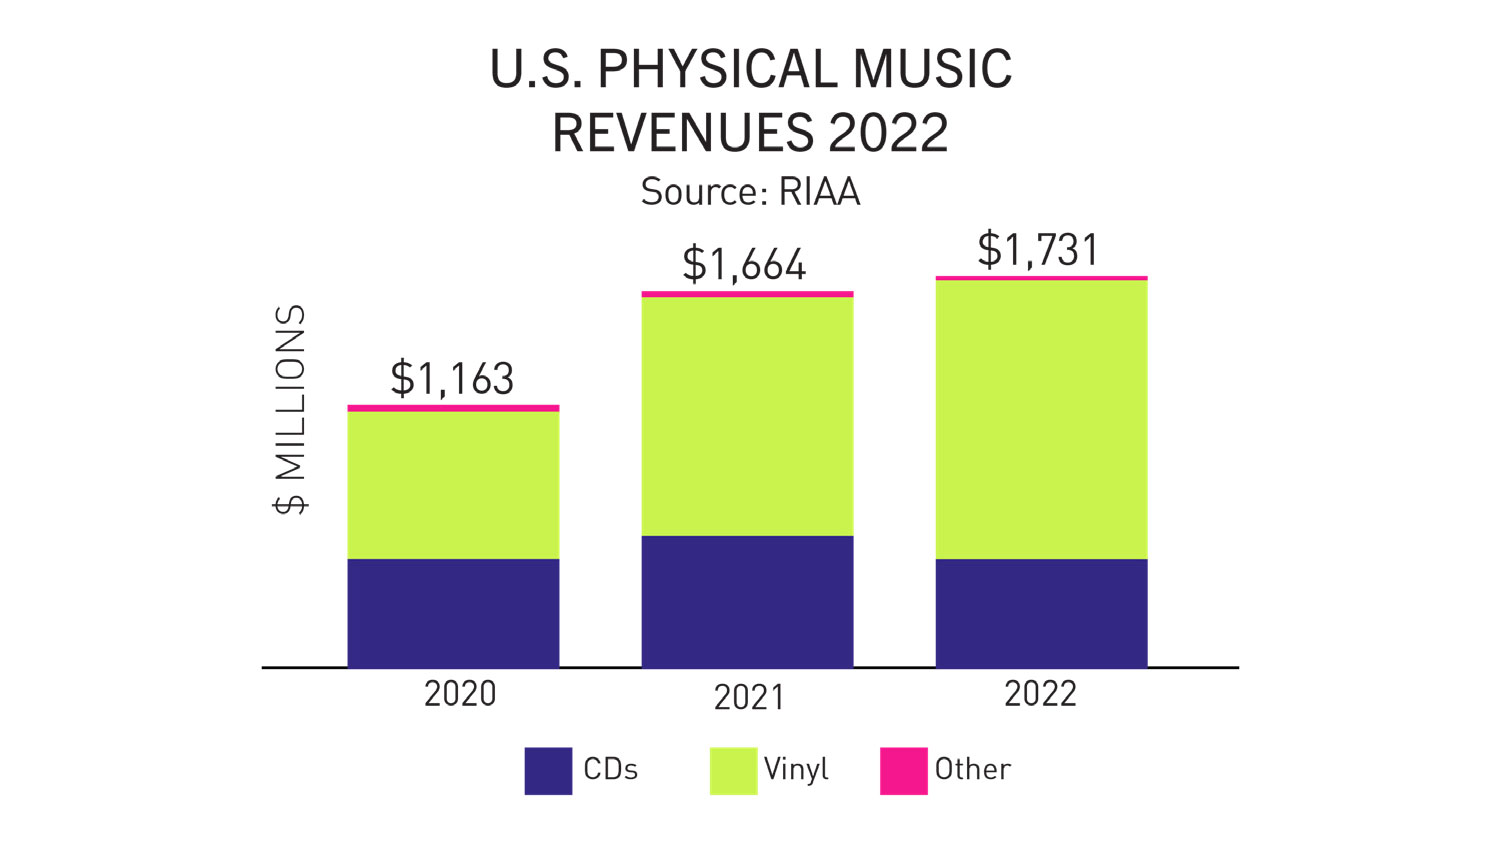 Physical music revenues in the U.S. 2020-2022, showing the growth of vinyl. (Image Credit: Recording Industry Association of America)